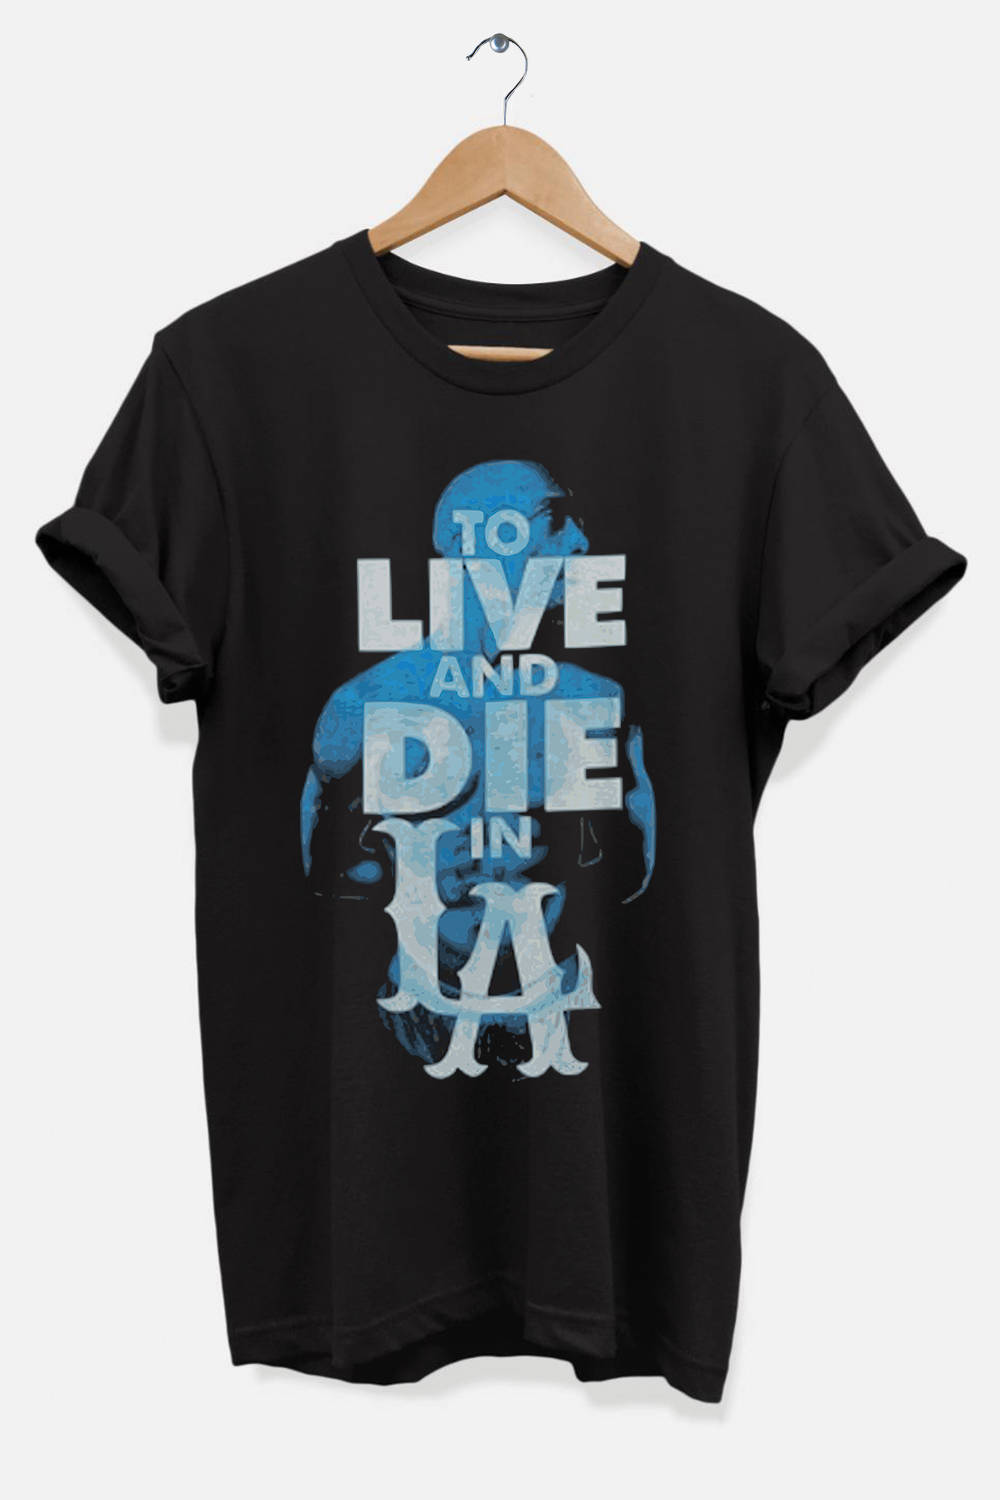 Hipsters Remedy to Live and Die in La T-Shirt - Black - 3XL